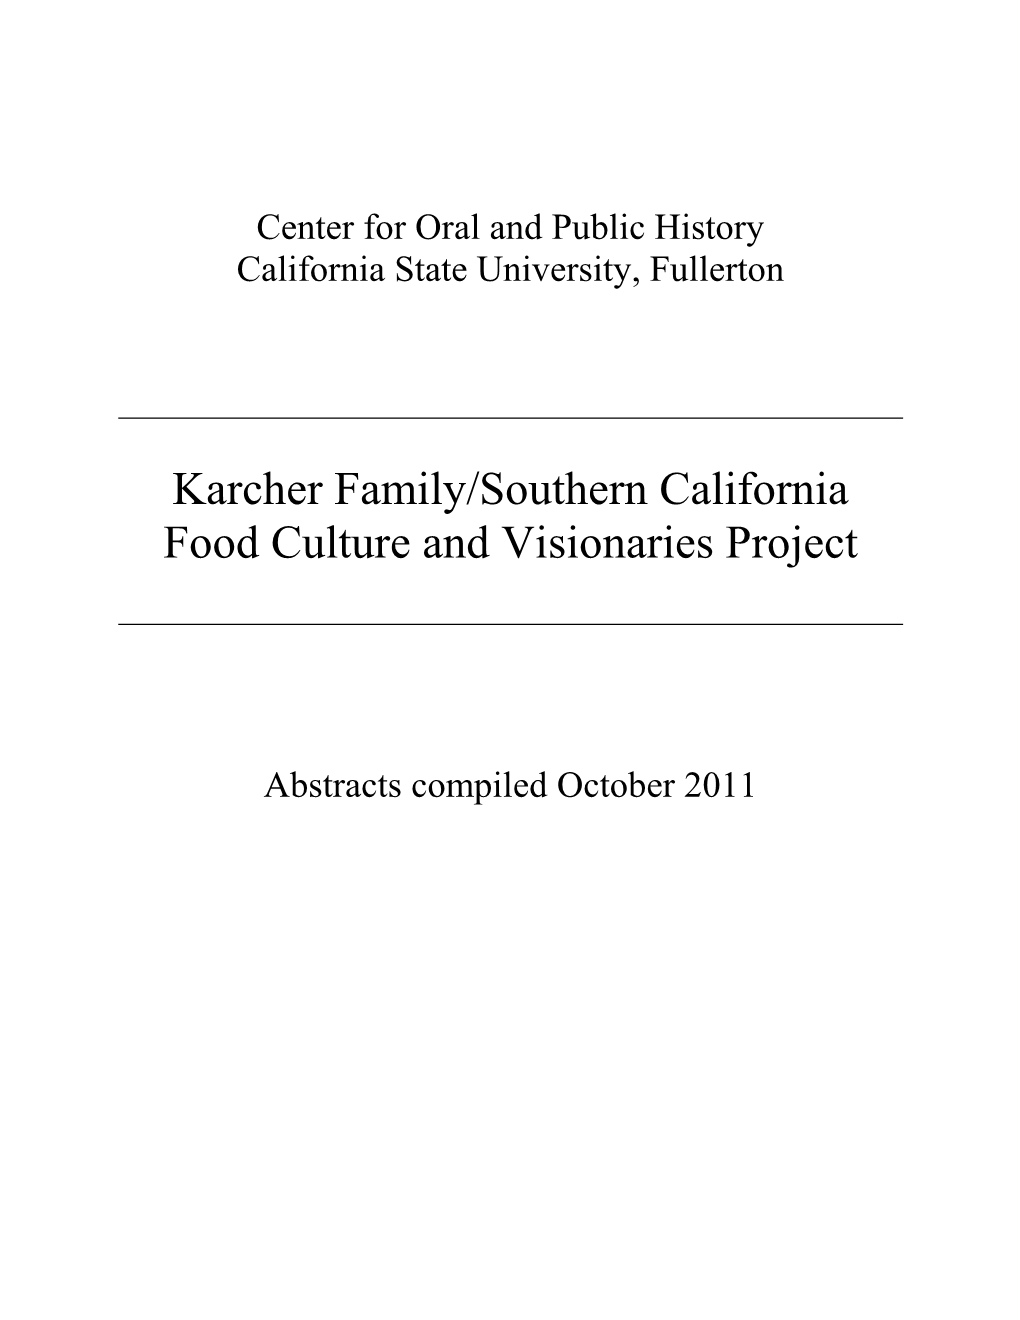 Karcher Family/Southern California Food Culture and Visionaries Project